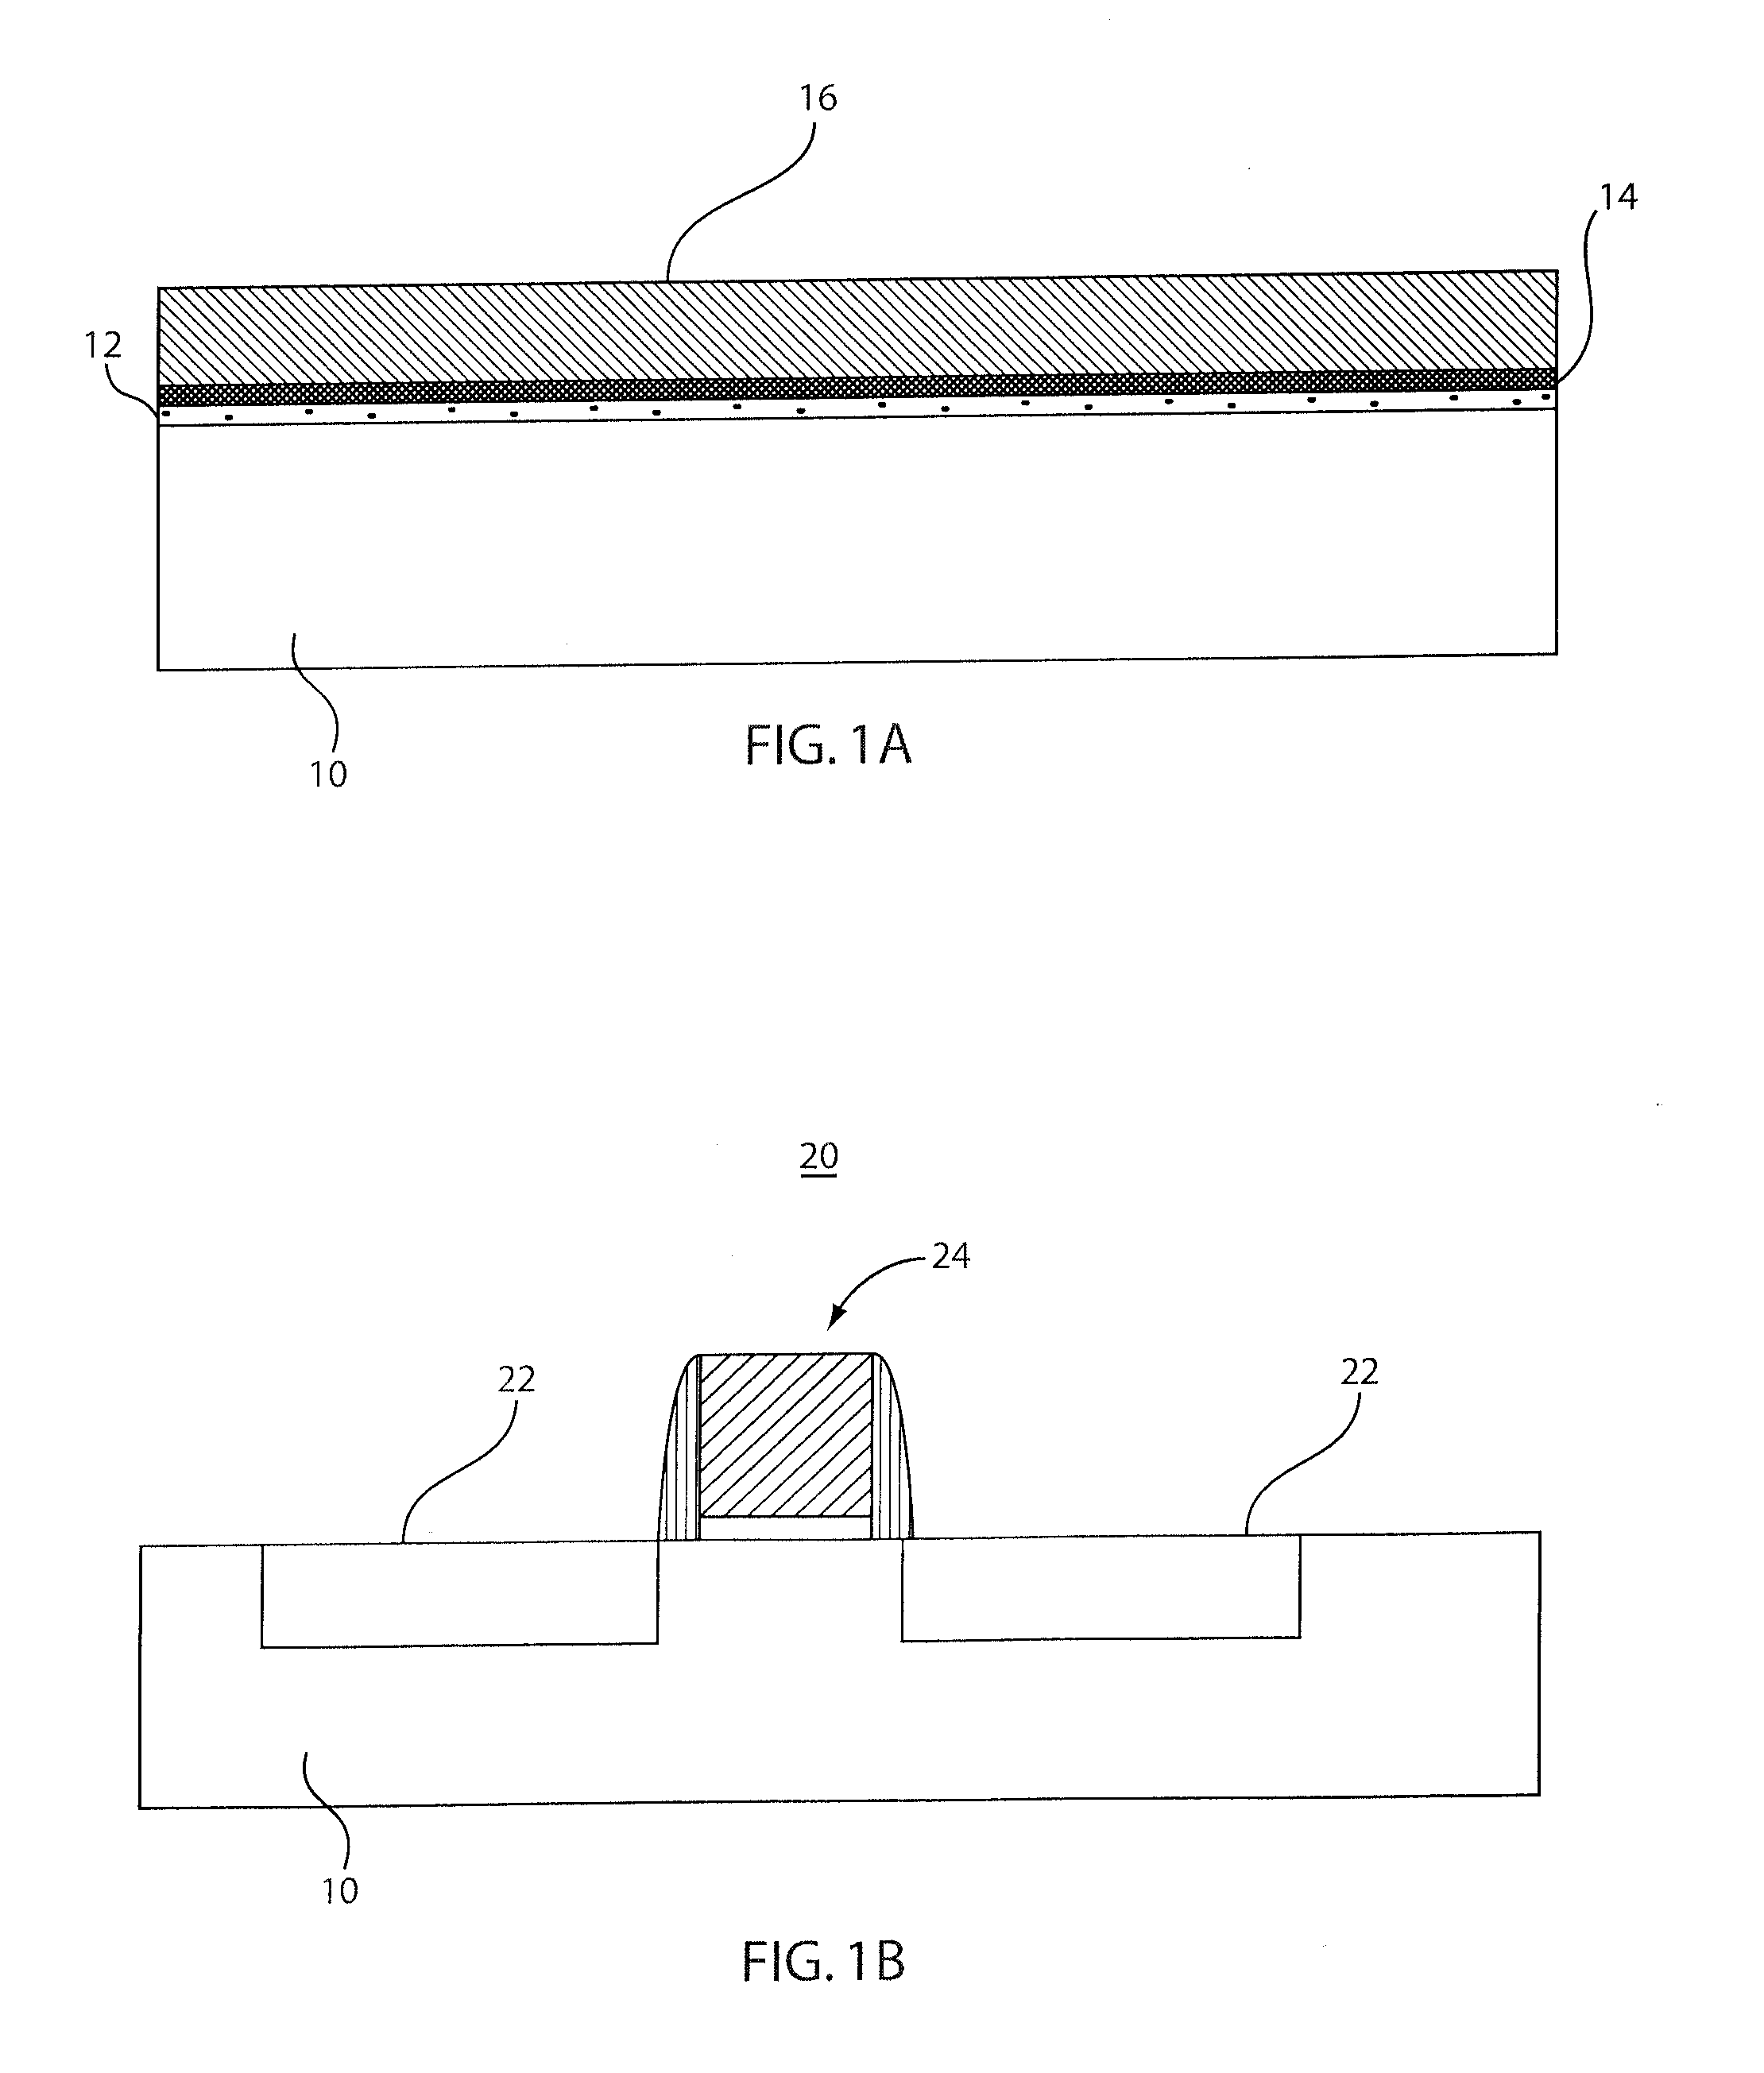 Device and method for boron diffusion in semiconductors